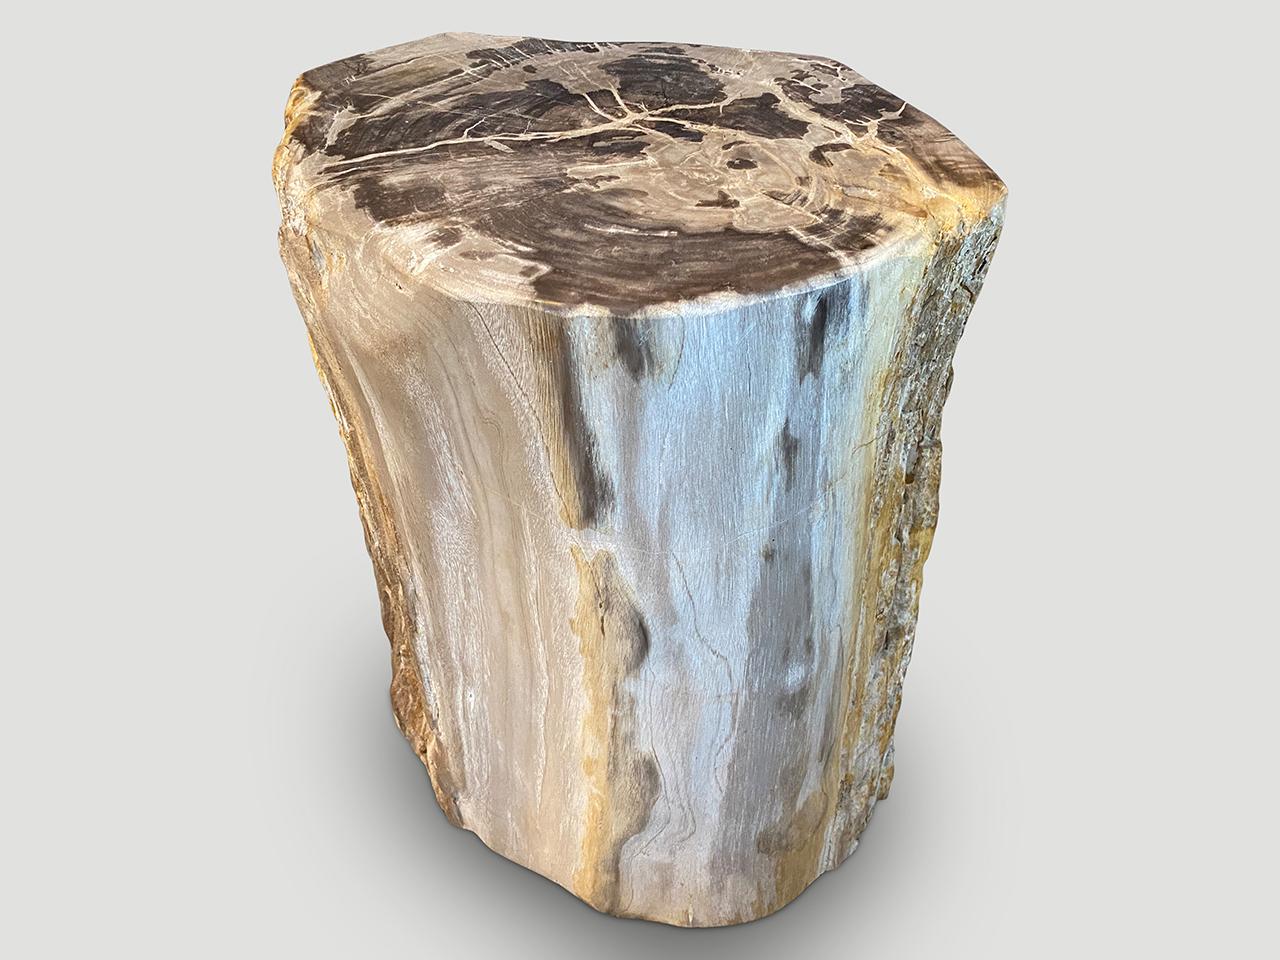 High quality petrified wood side table. This one has contrasting markings and natural crystals imbedded in the sides. Hard to capture in an image. We can also send a video. Please inquire. It’s fascinating how Mother Nature produces these exquisite